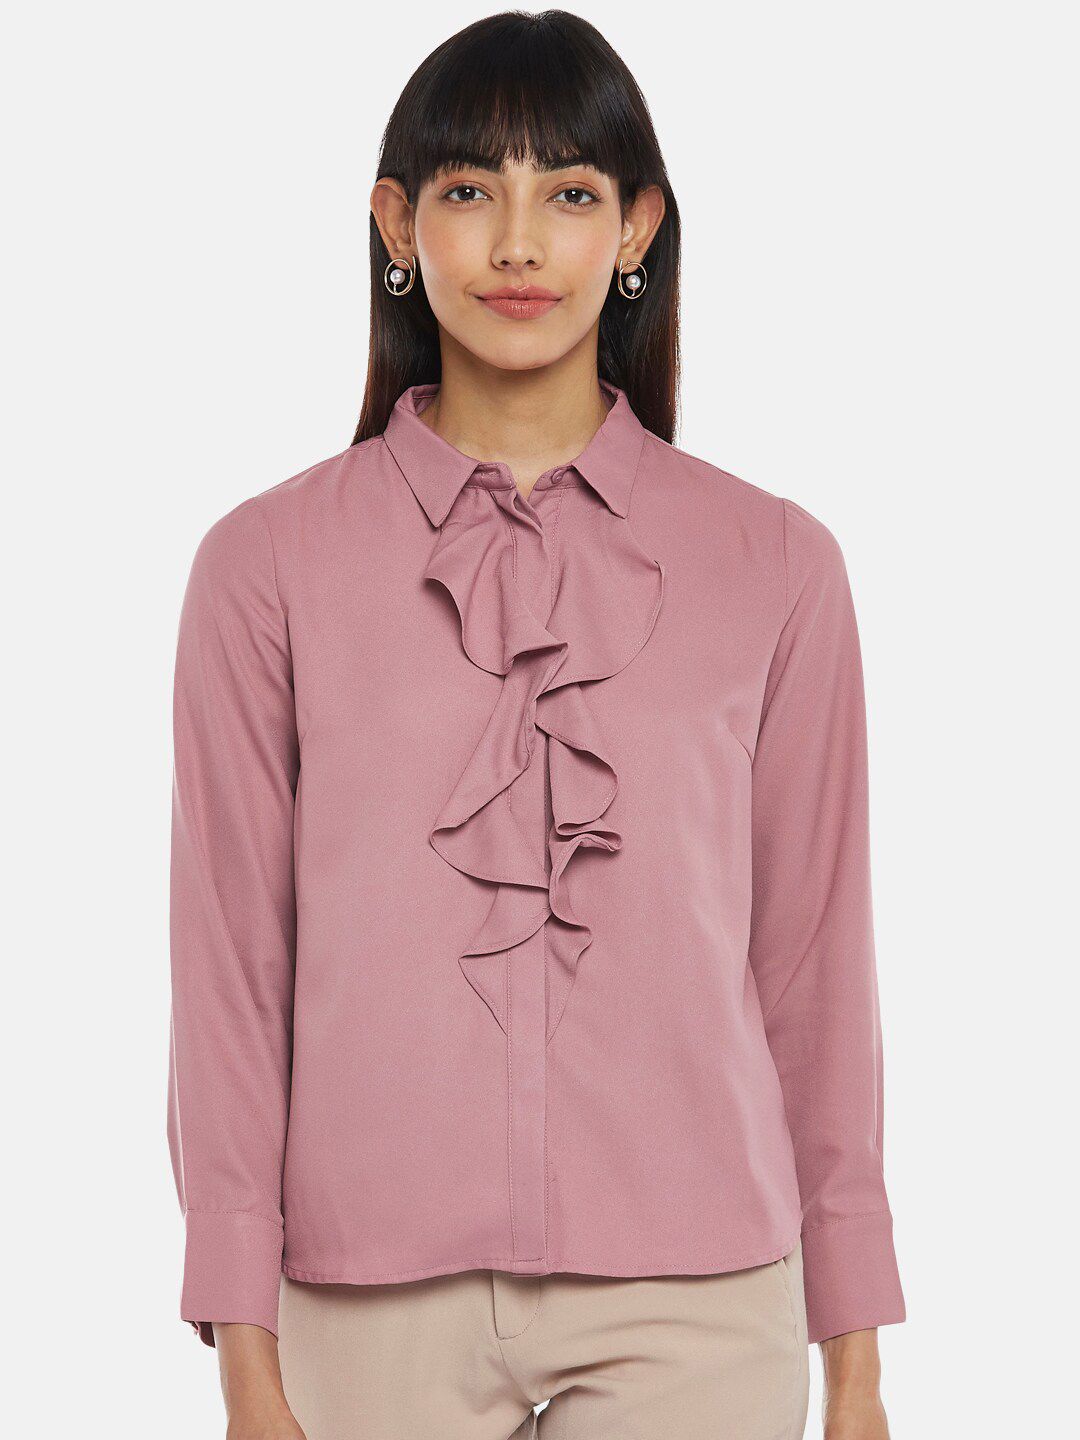 Annabelle by Pantaloons Pink Shirt Style Top Price in India